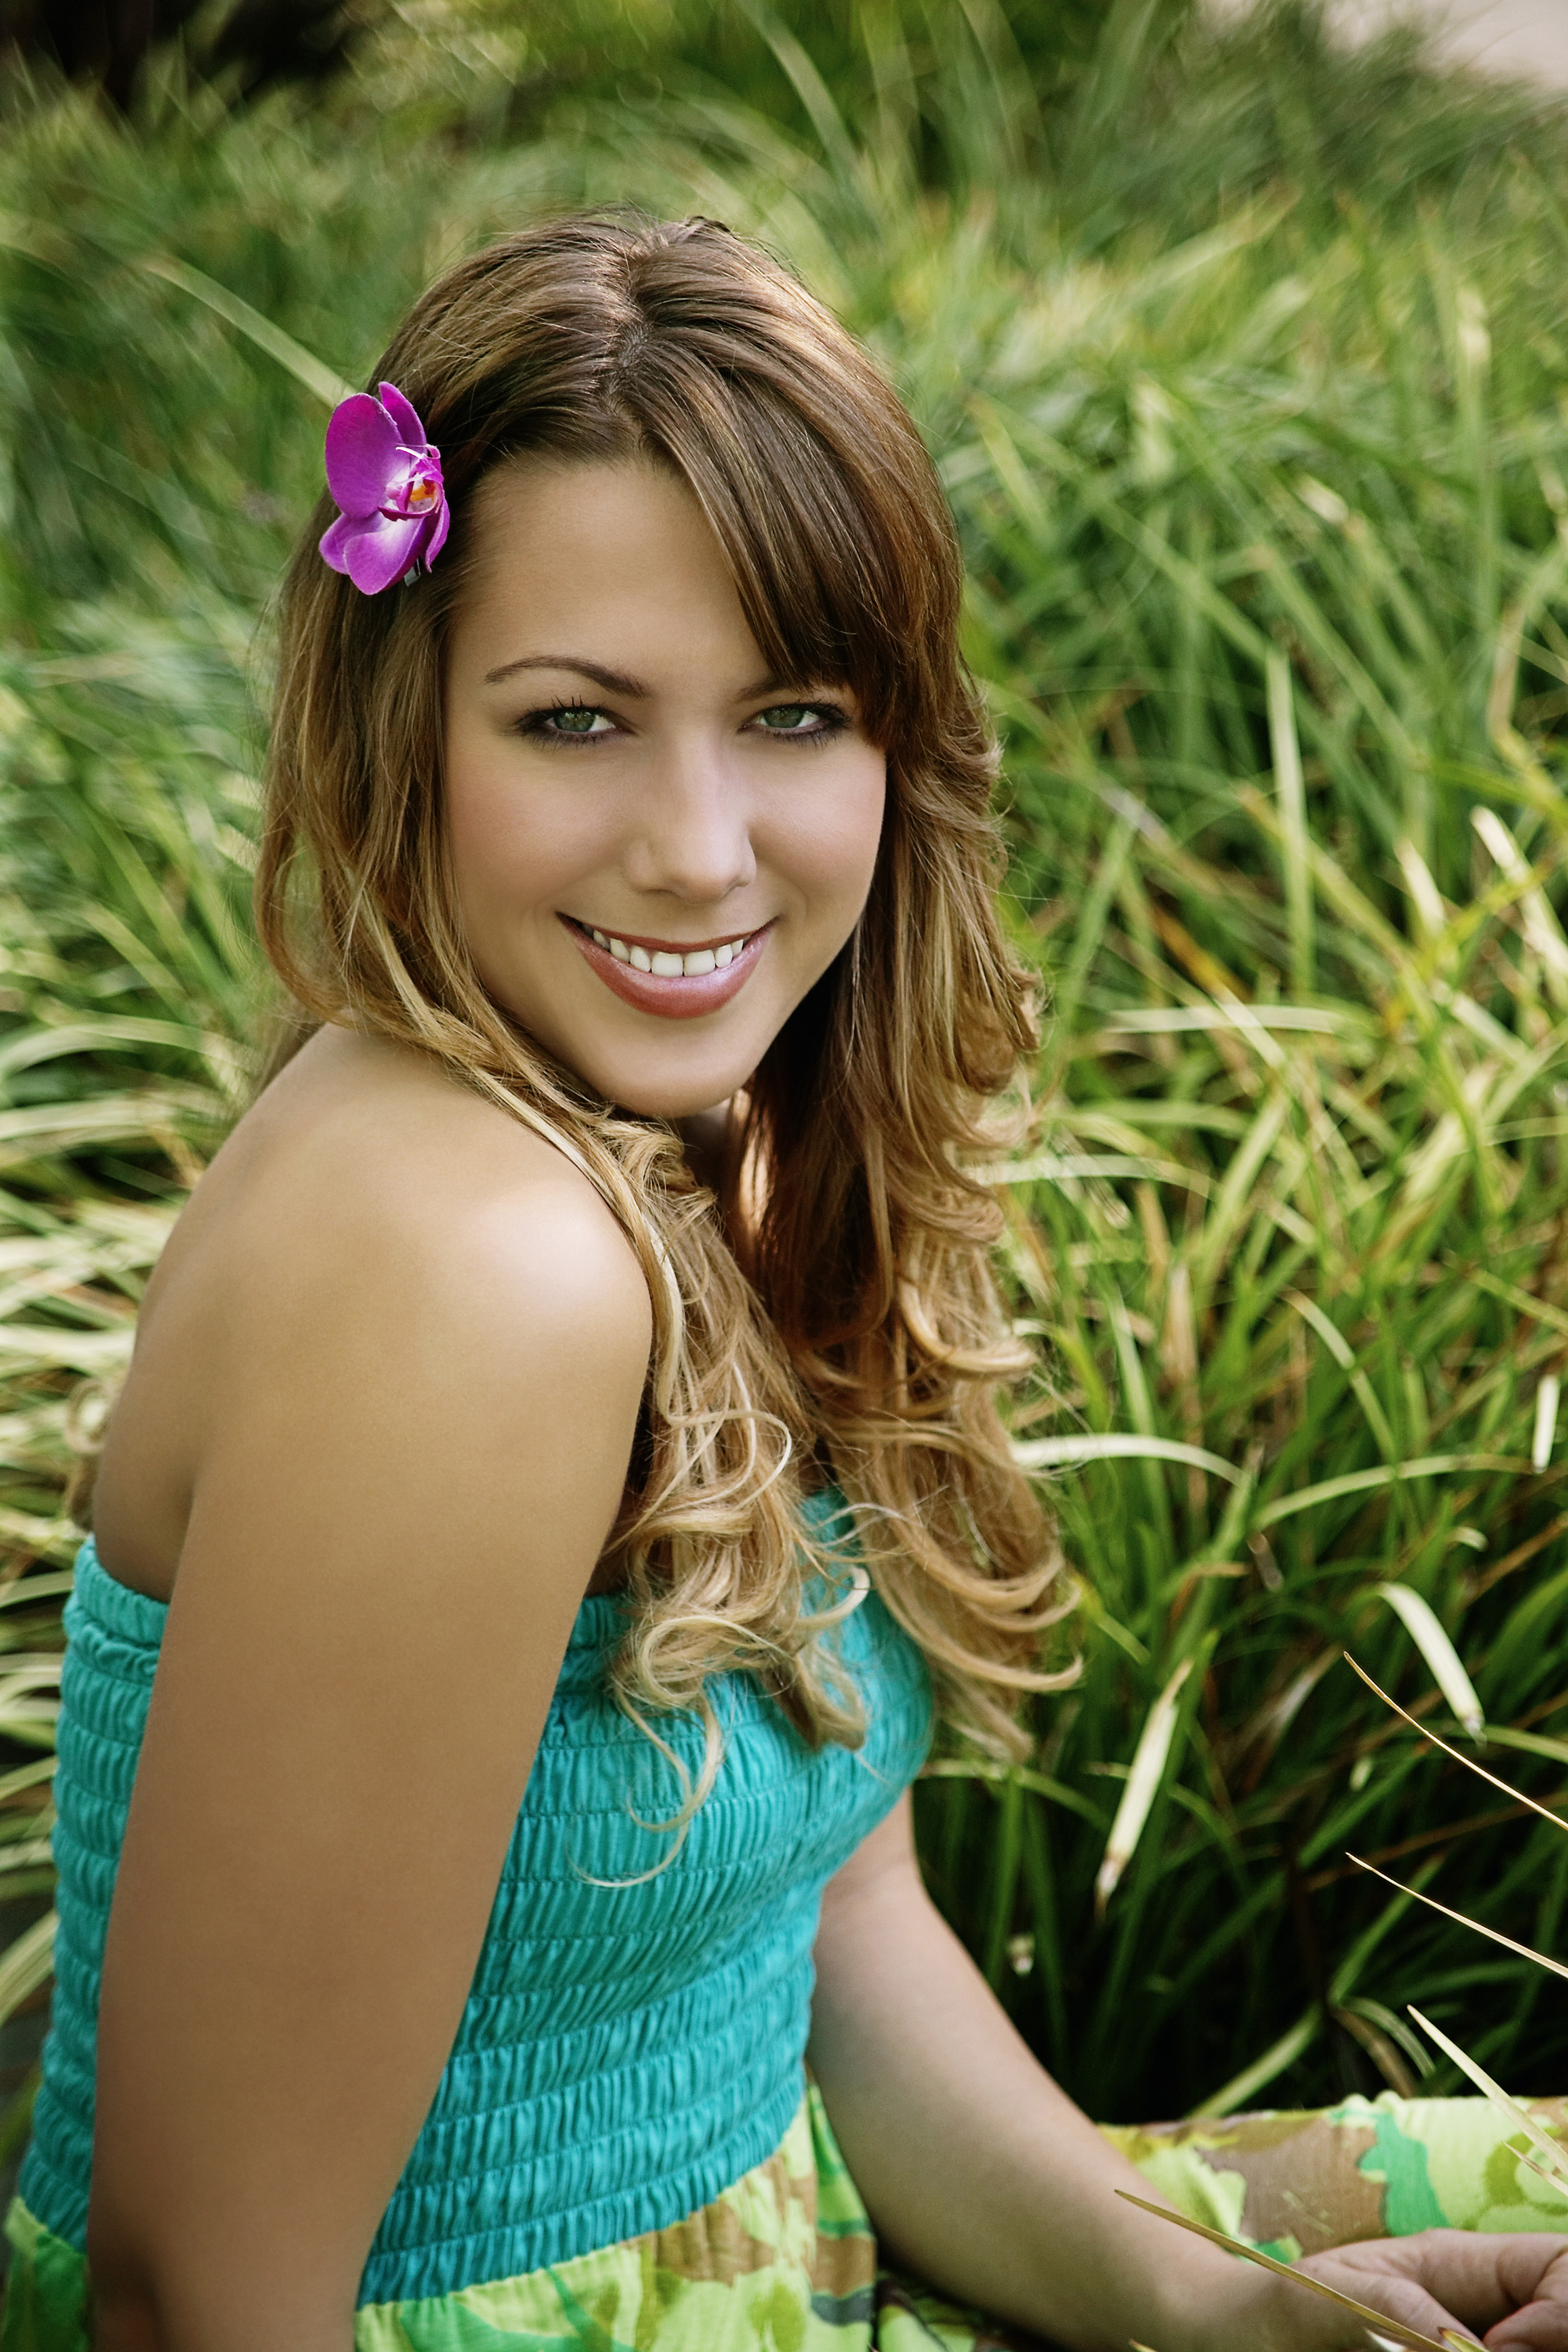 Colbie Caillat photo #1253551.